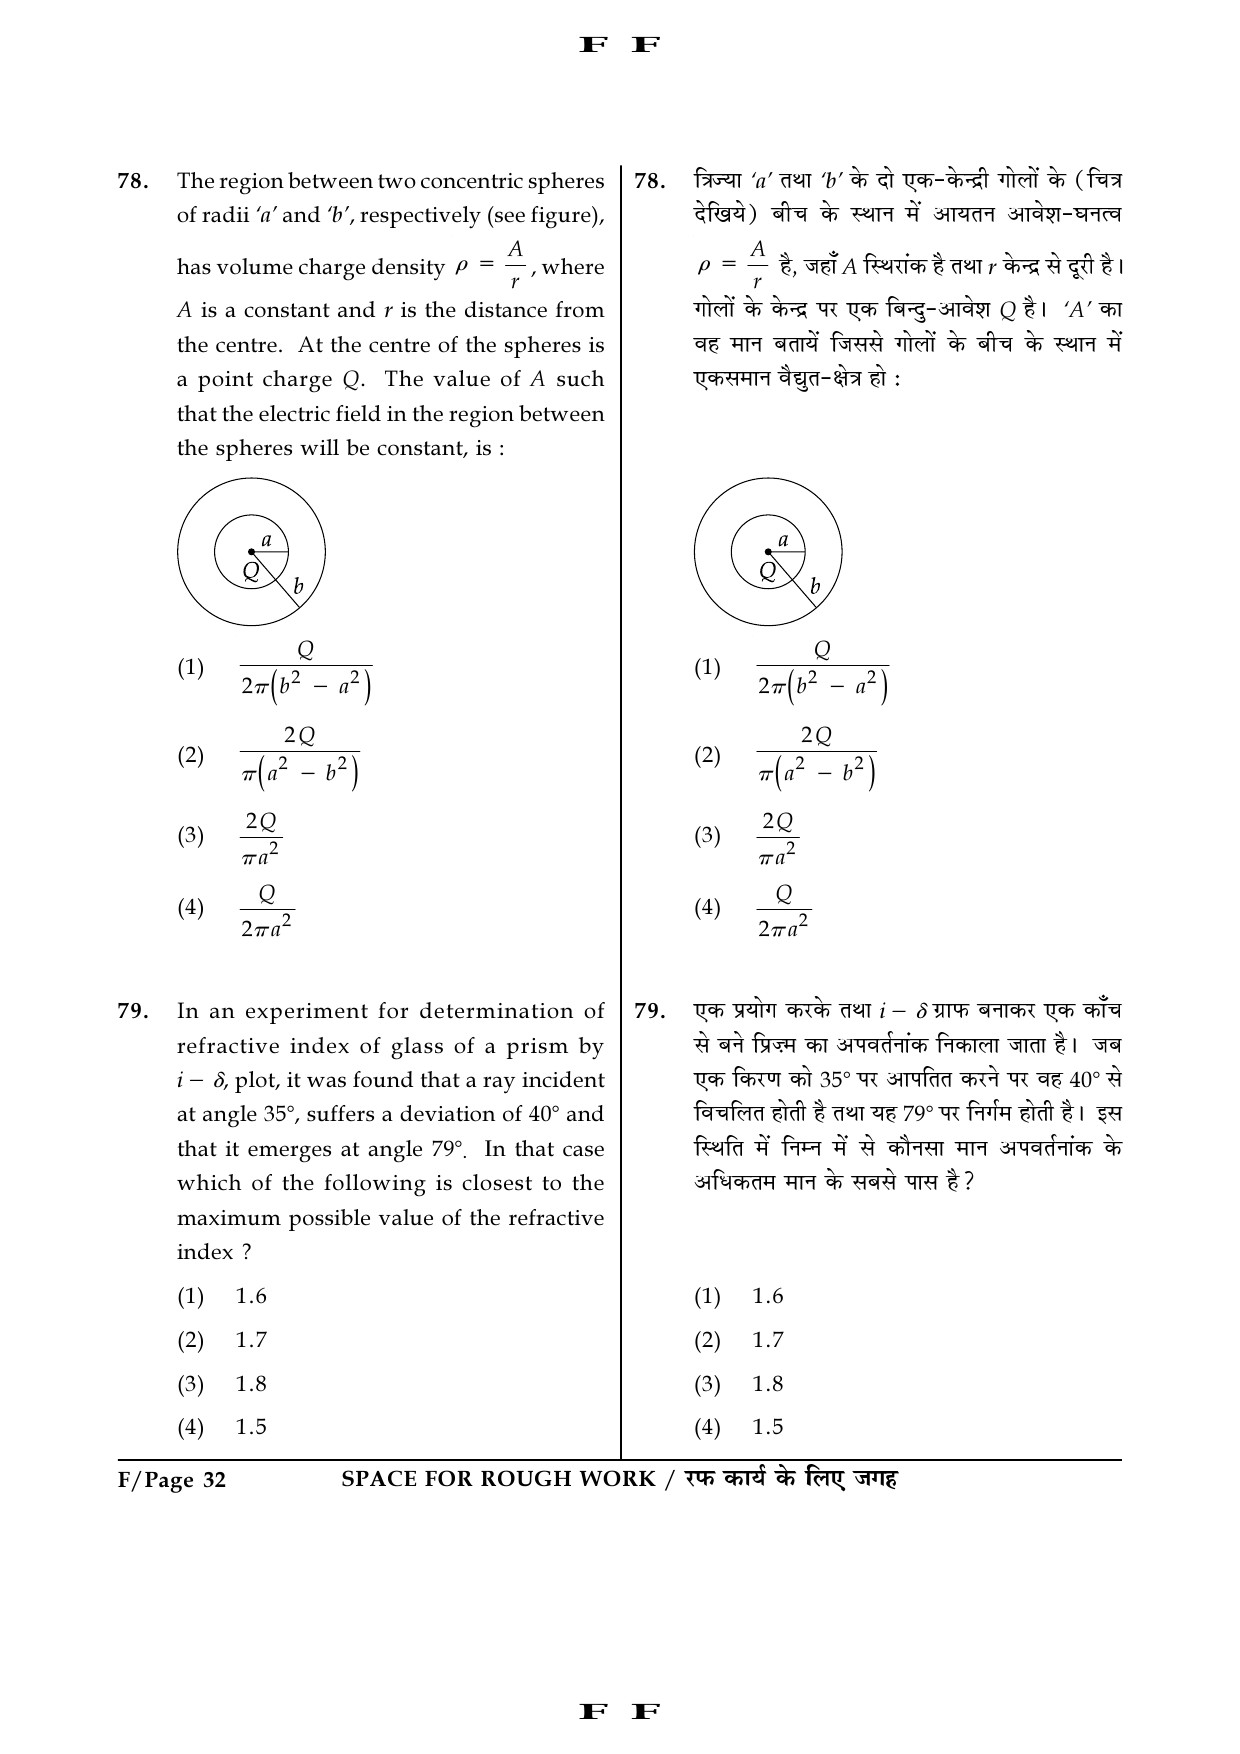 JEE Main Exam Question Paper 2016 Booklet F 32